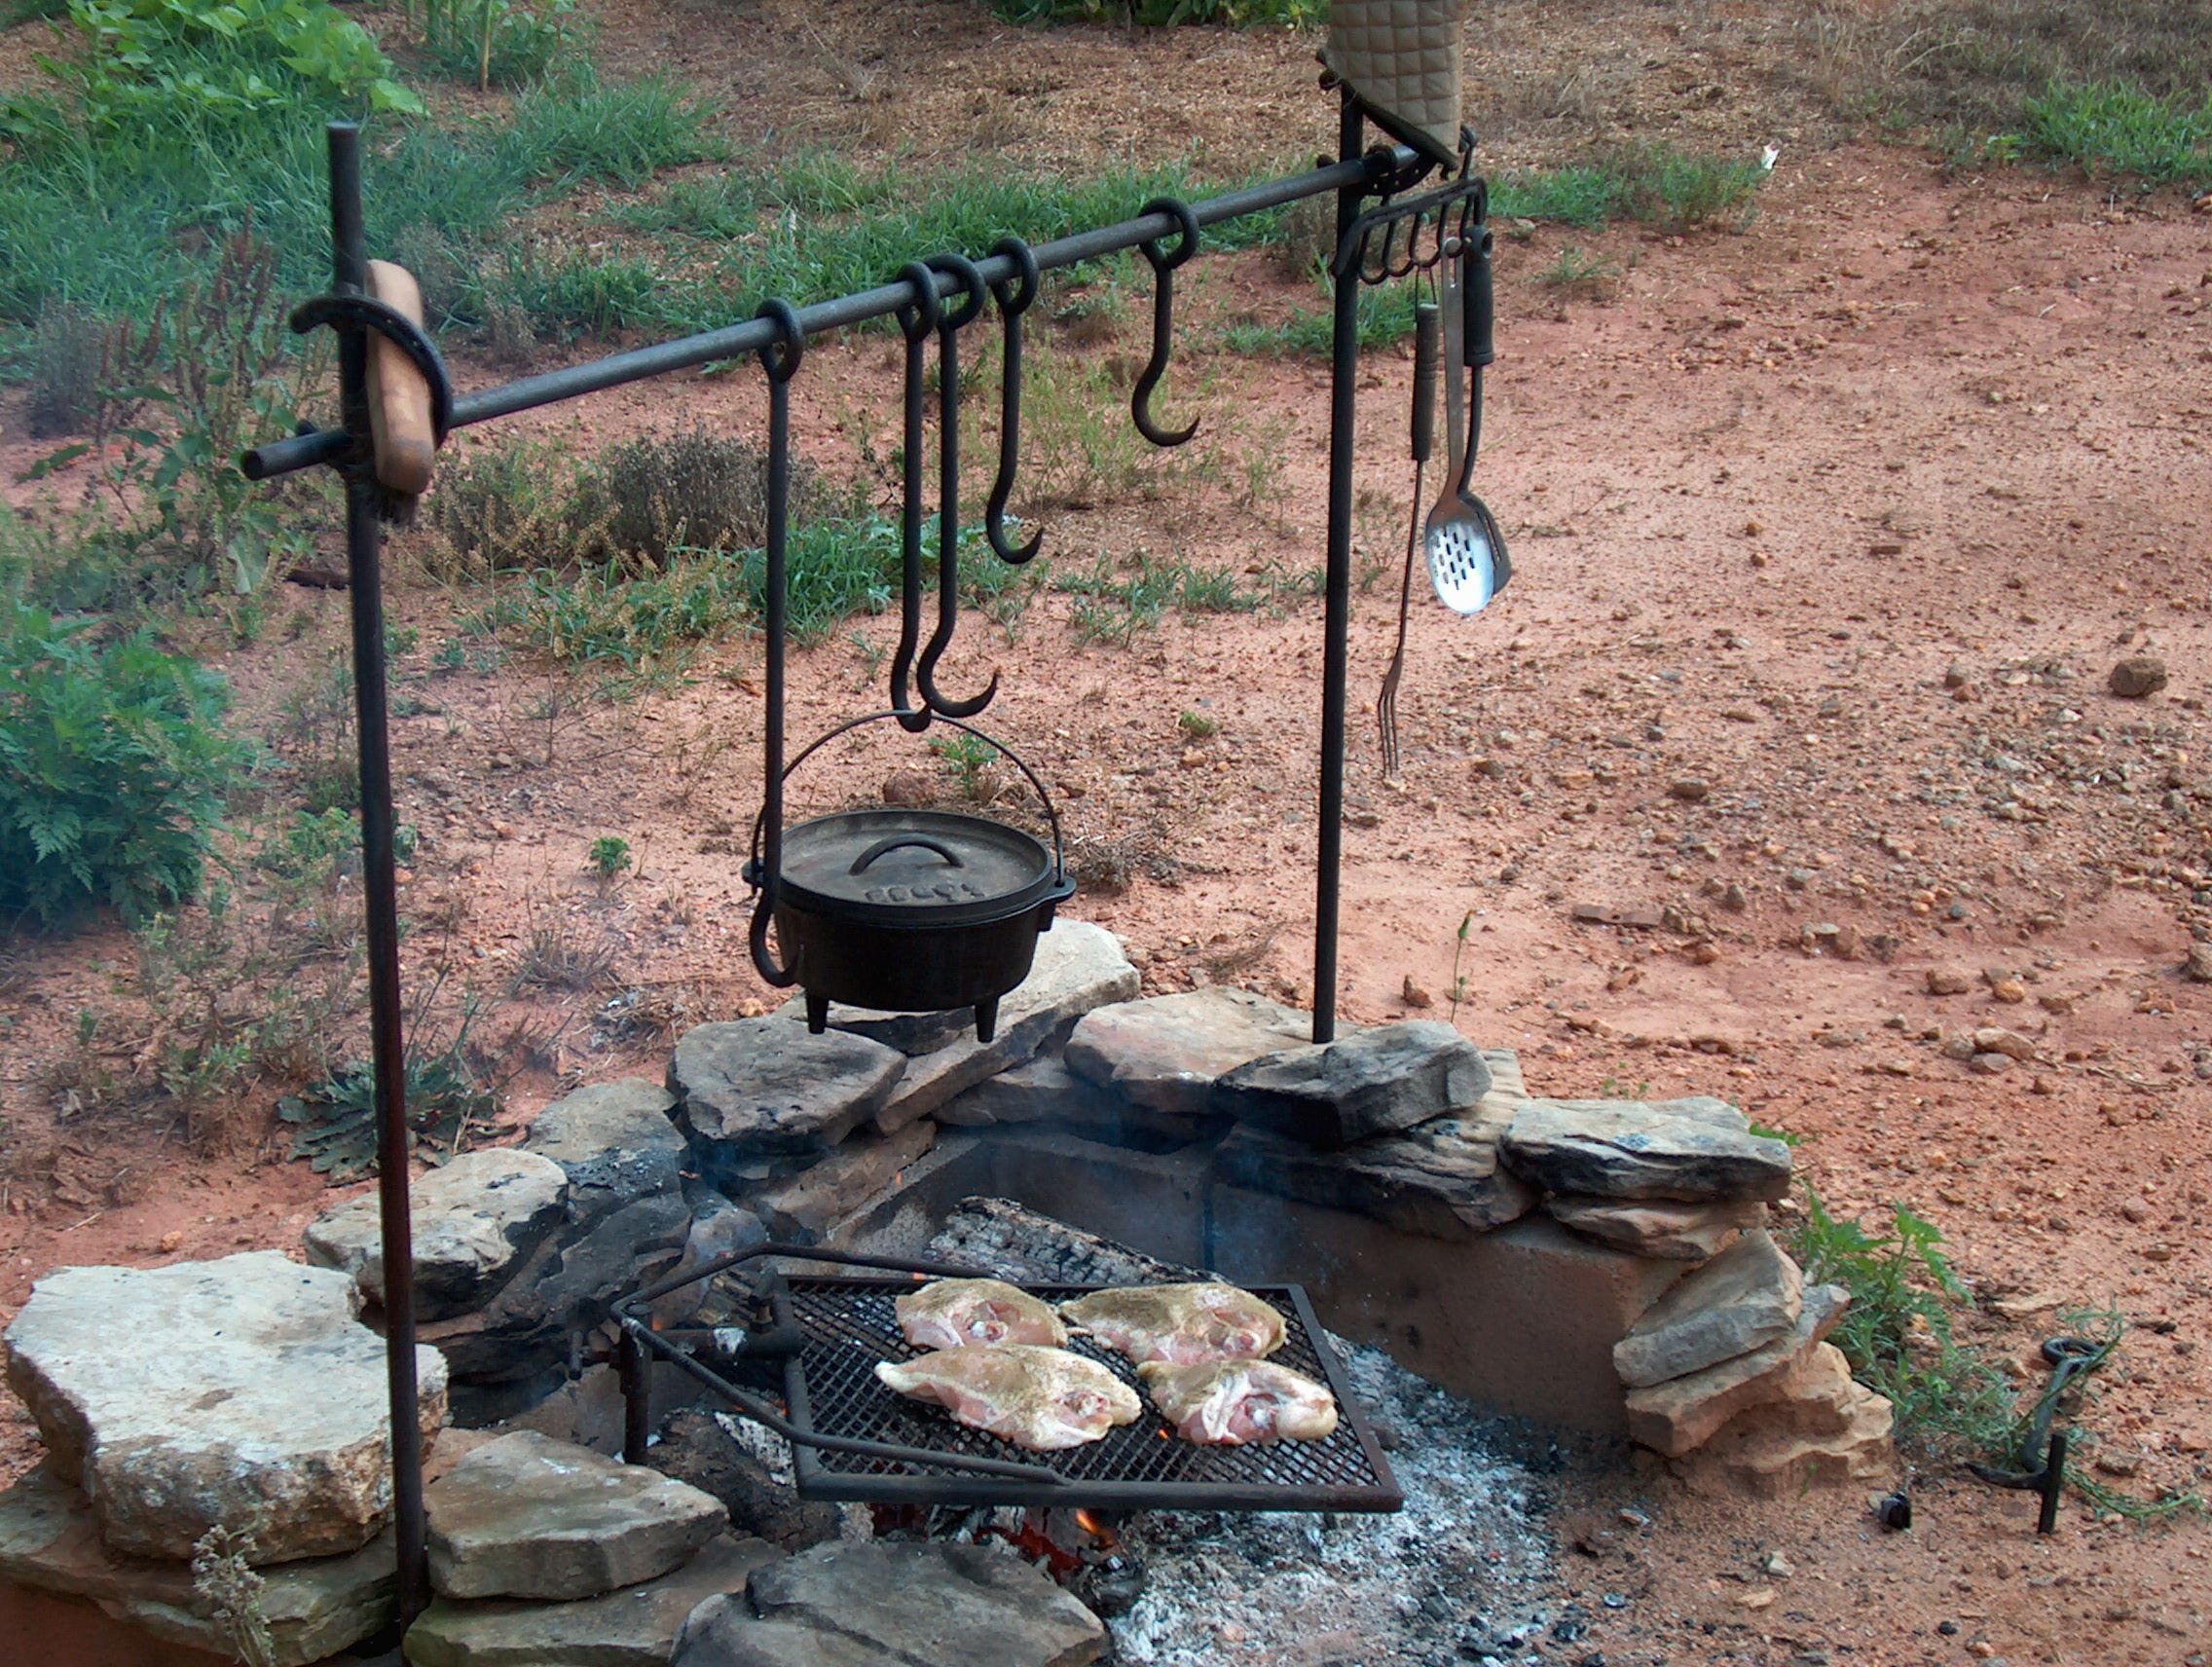 Fireplace Cooking Luxury Cowboy Er Rl Campfire Cooking I Want This so Bad